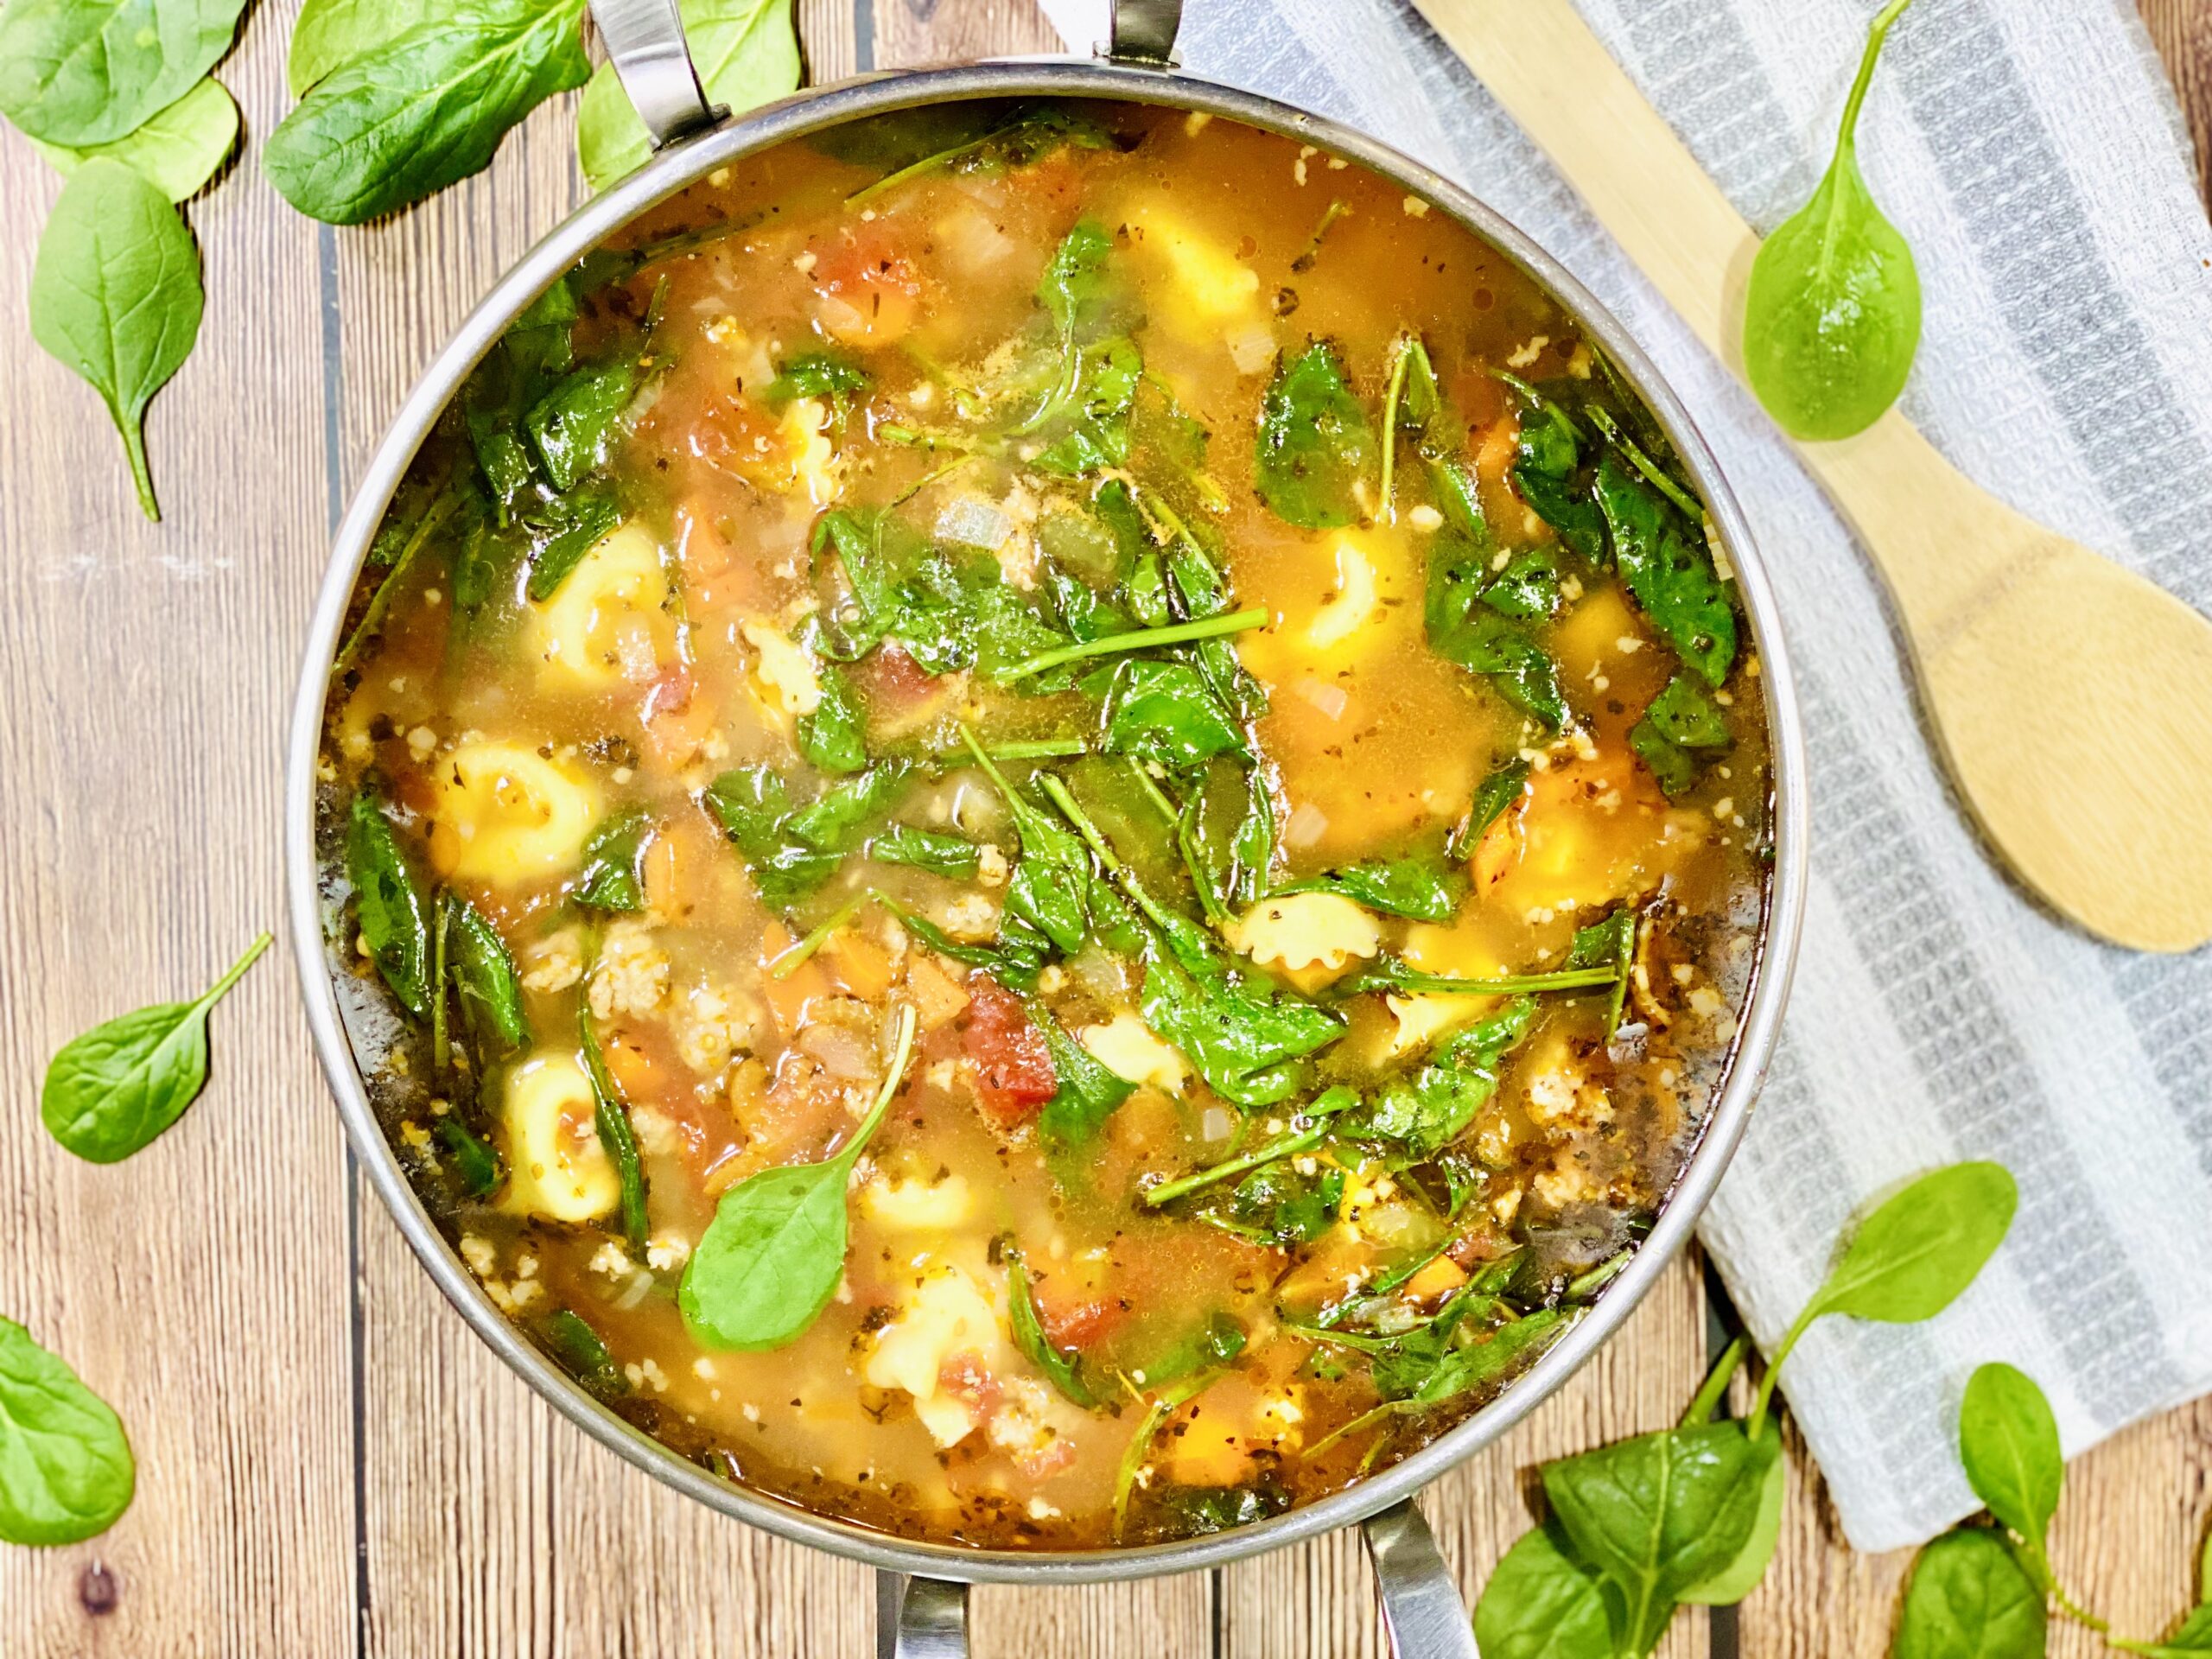 Sausage, spinach and tortellini soup